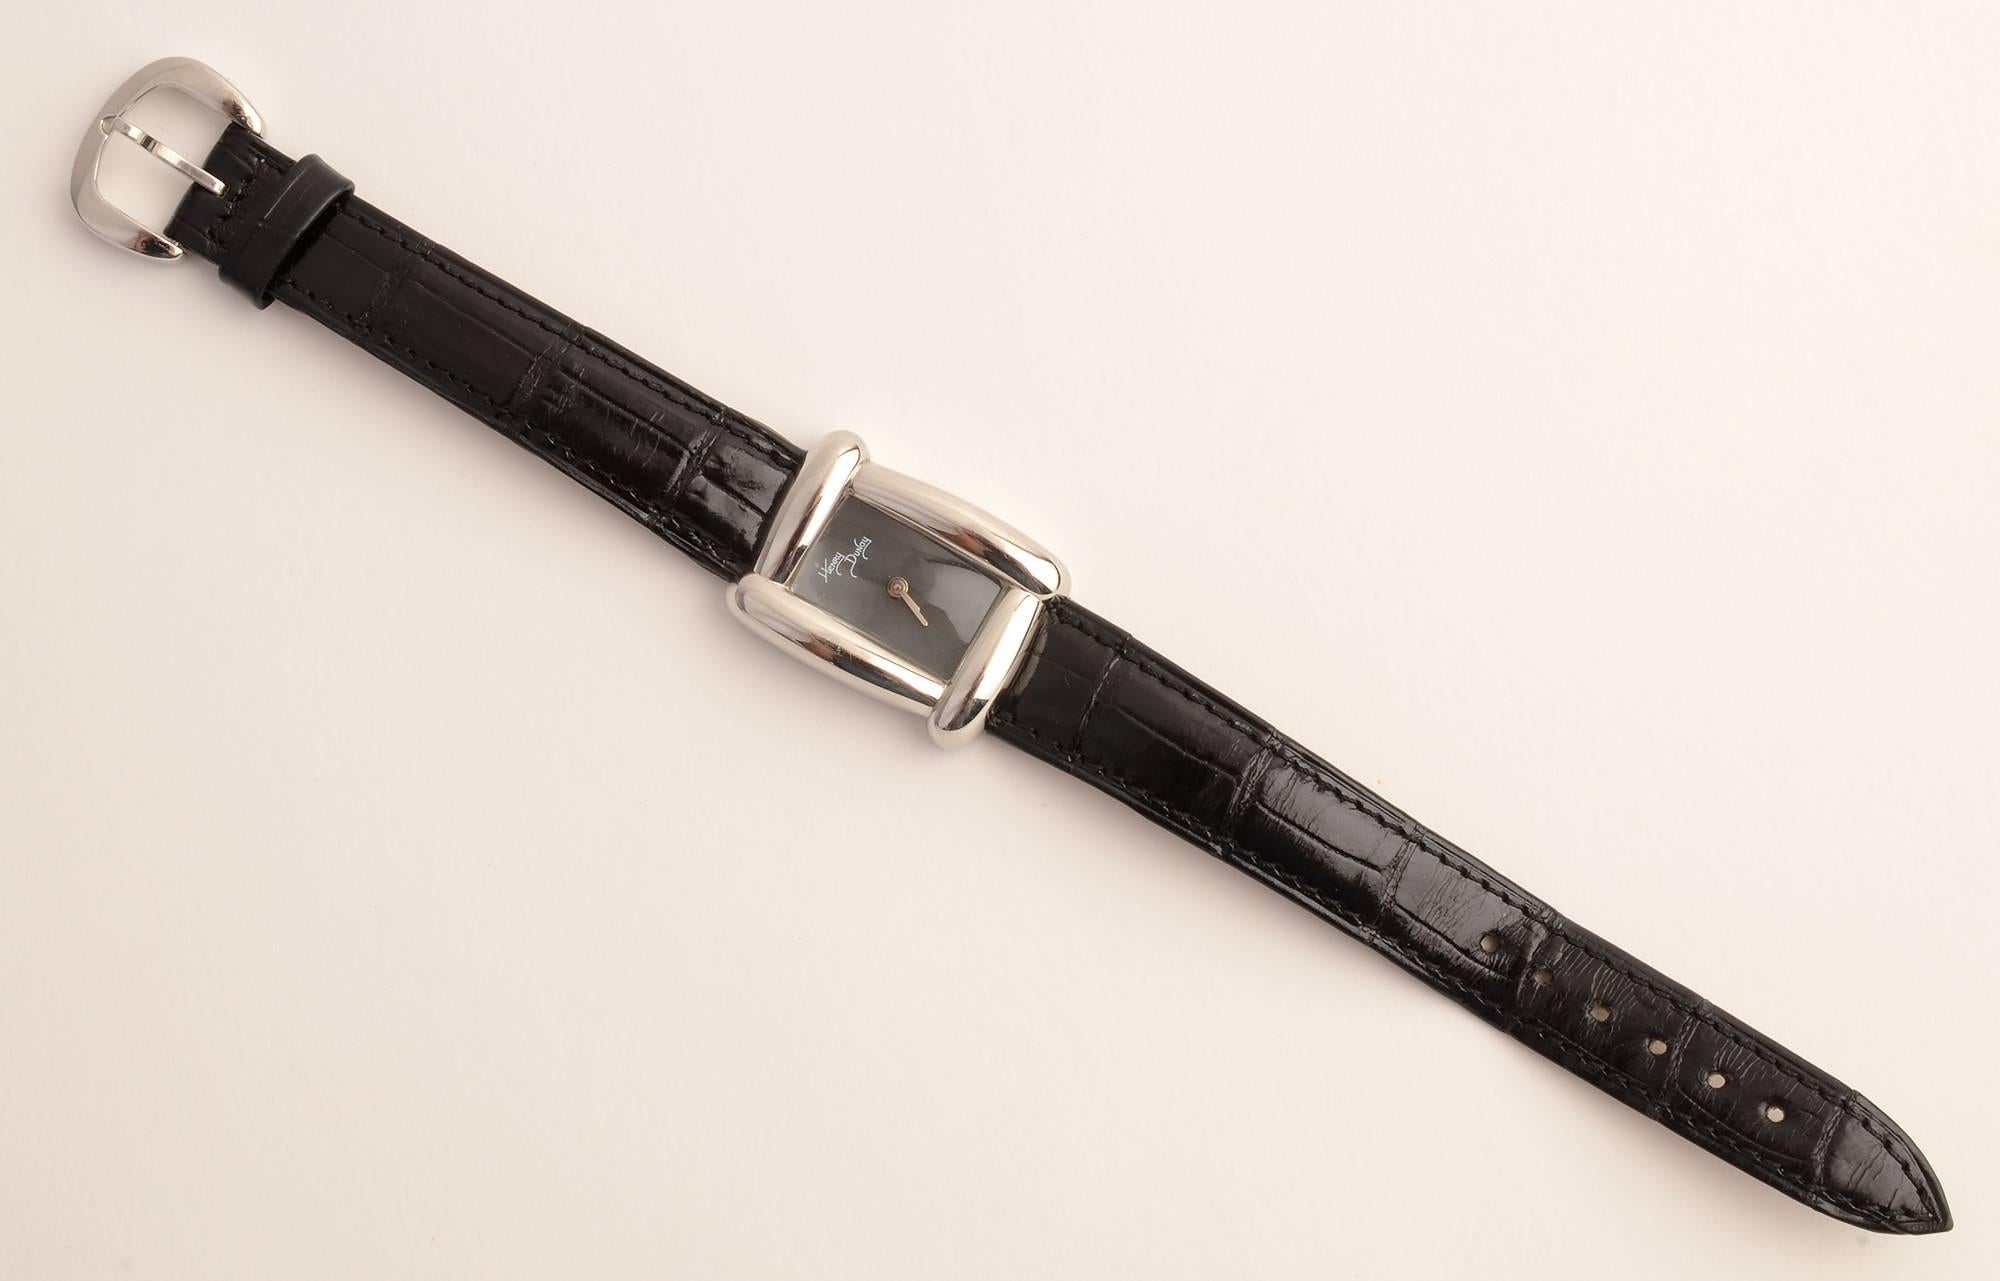 Stylish wrist watch by American jewelry designer, Henry Dunay. The rectangular black face is framed by the curvilinear design characteristic of his watches. Black leather band is original. 